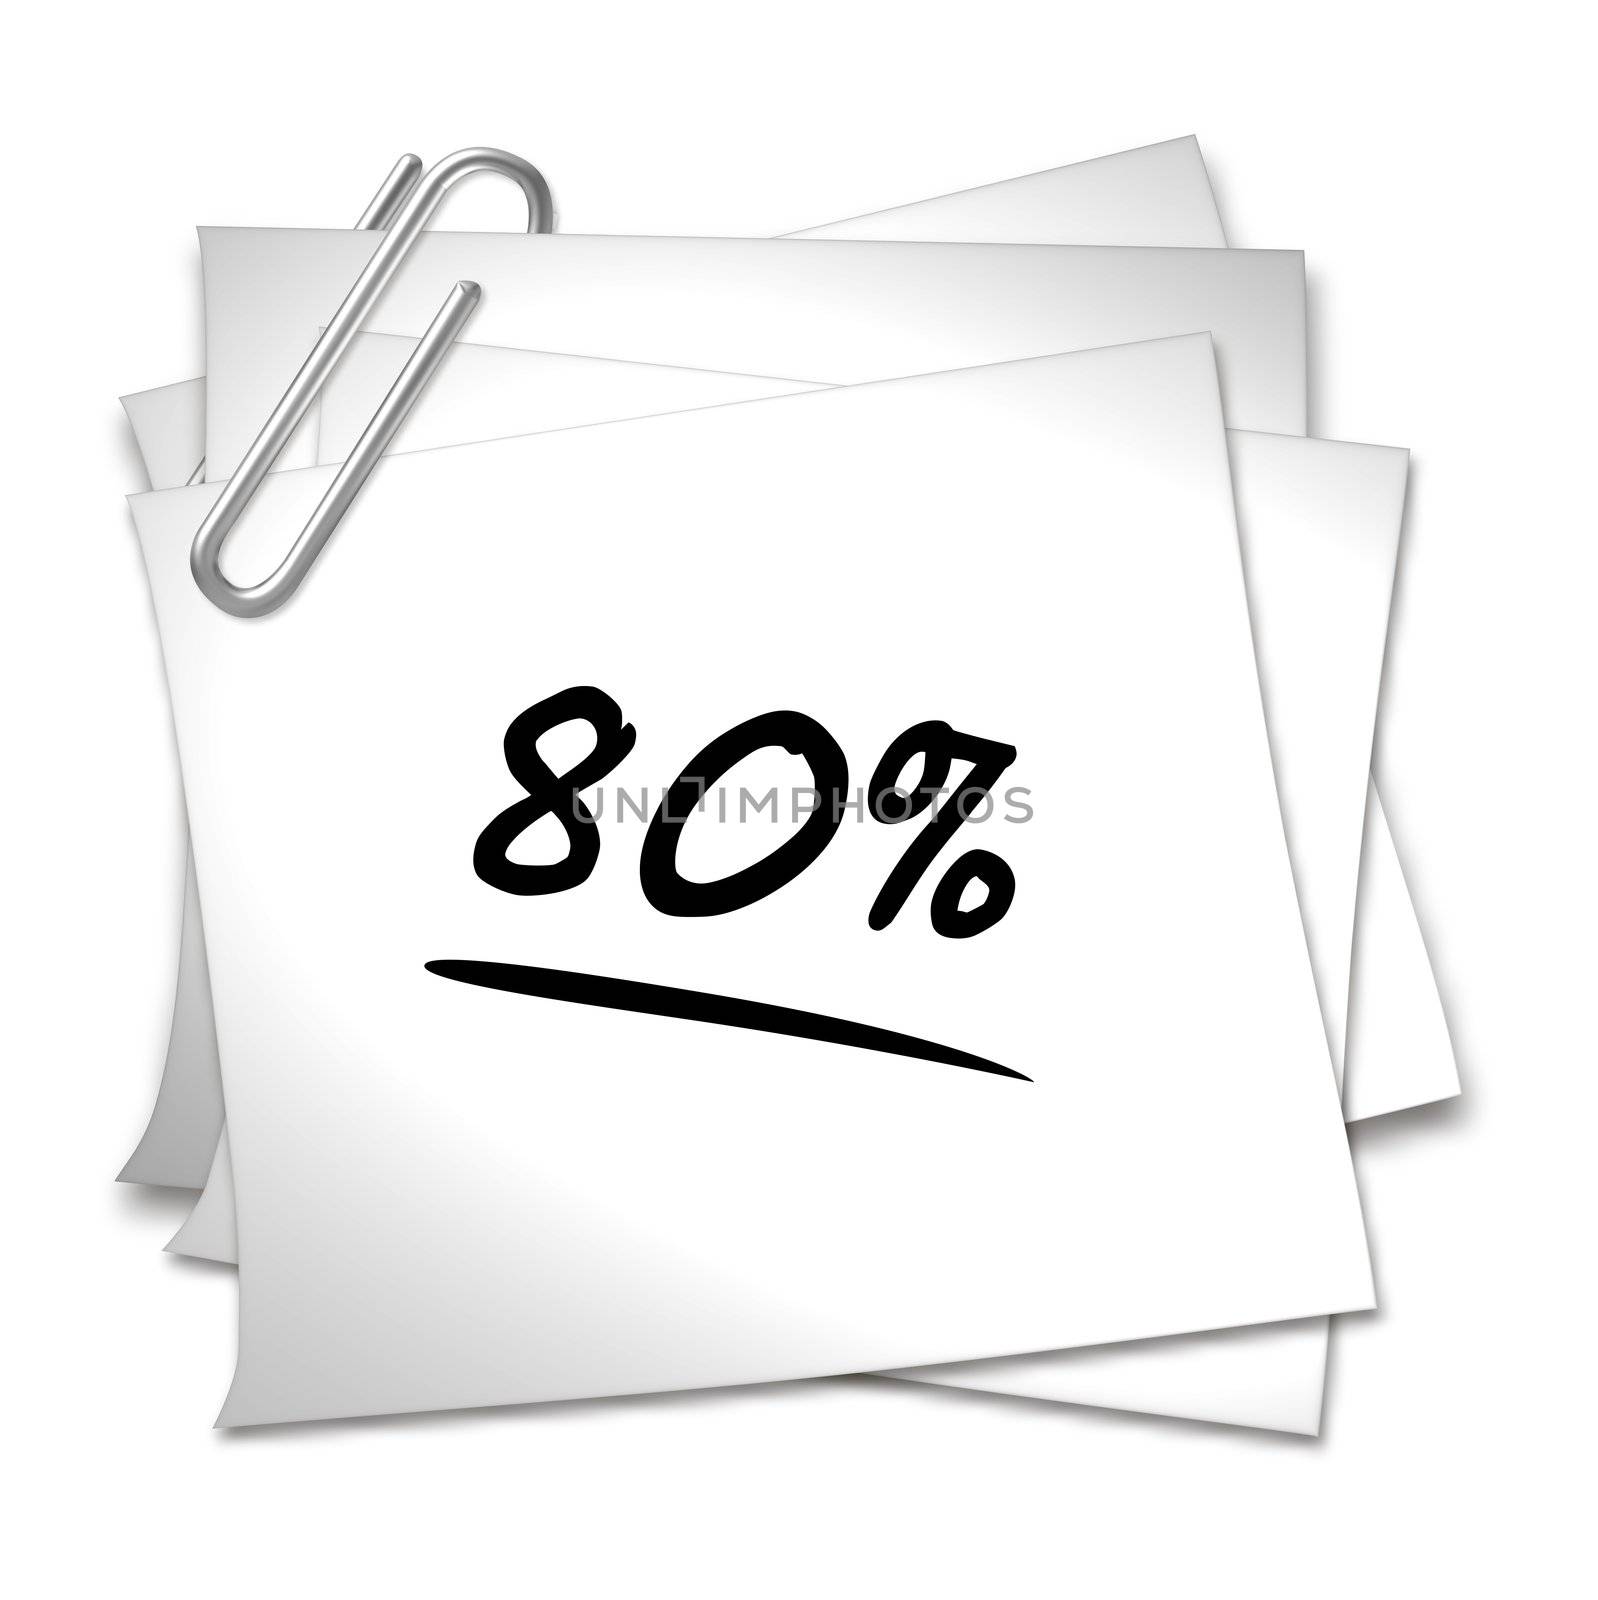 Memo with Paper Clip - 80 % by peromarketing